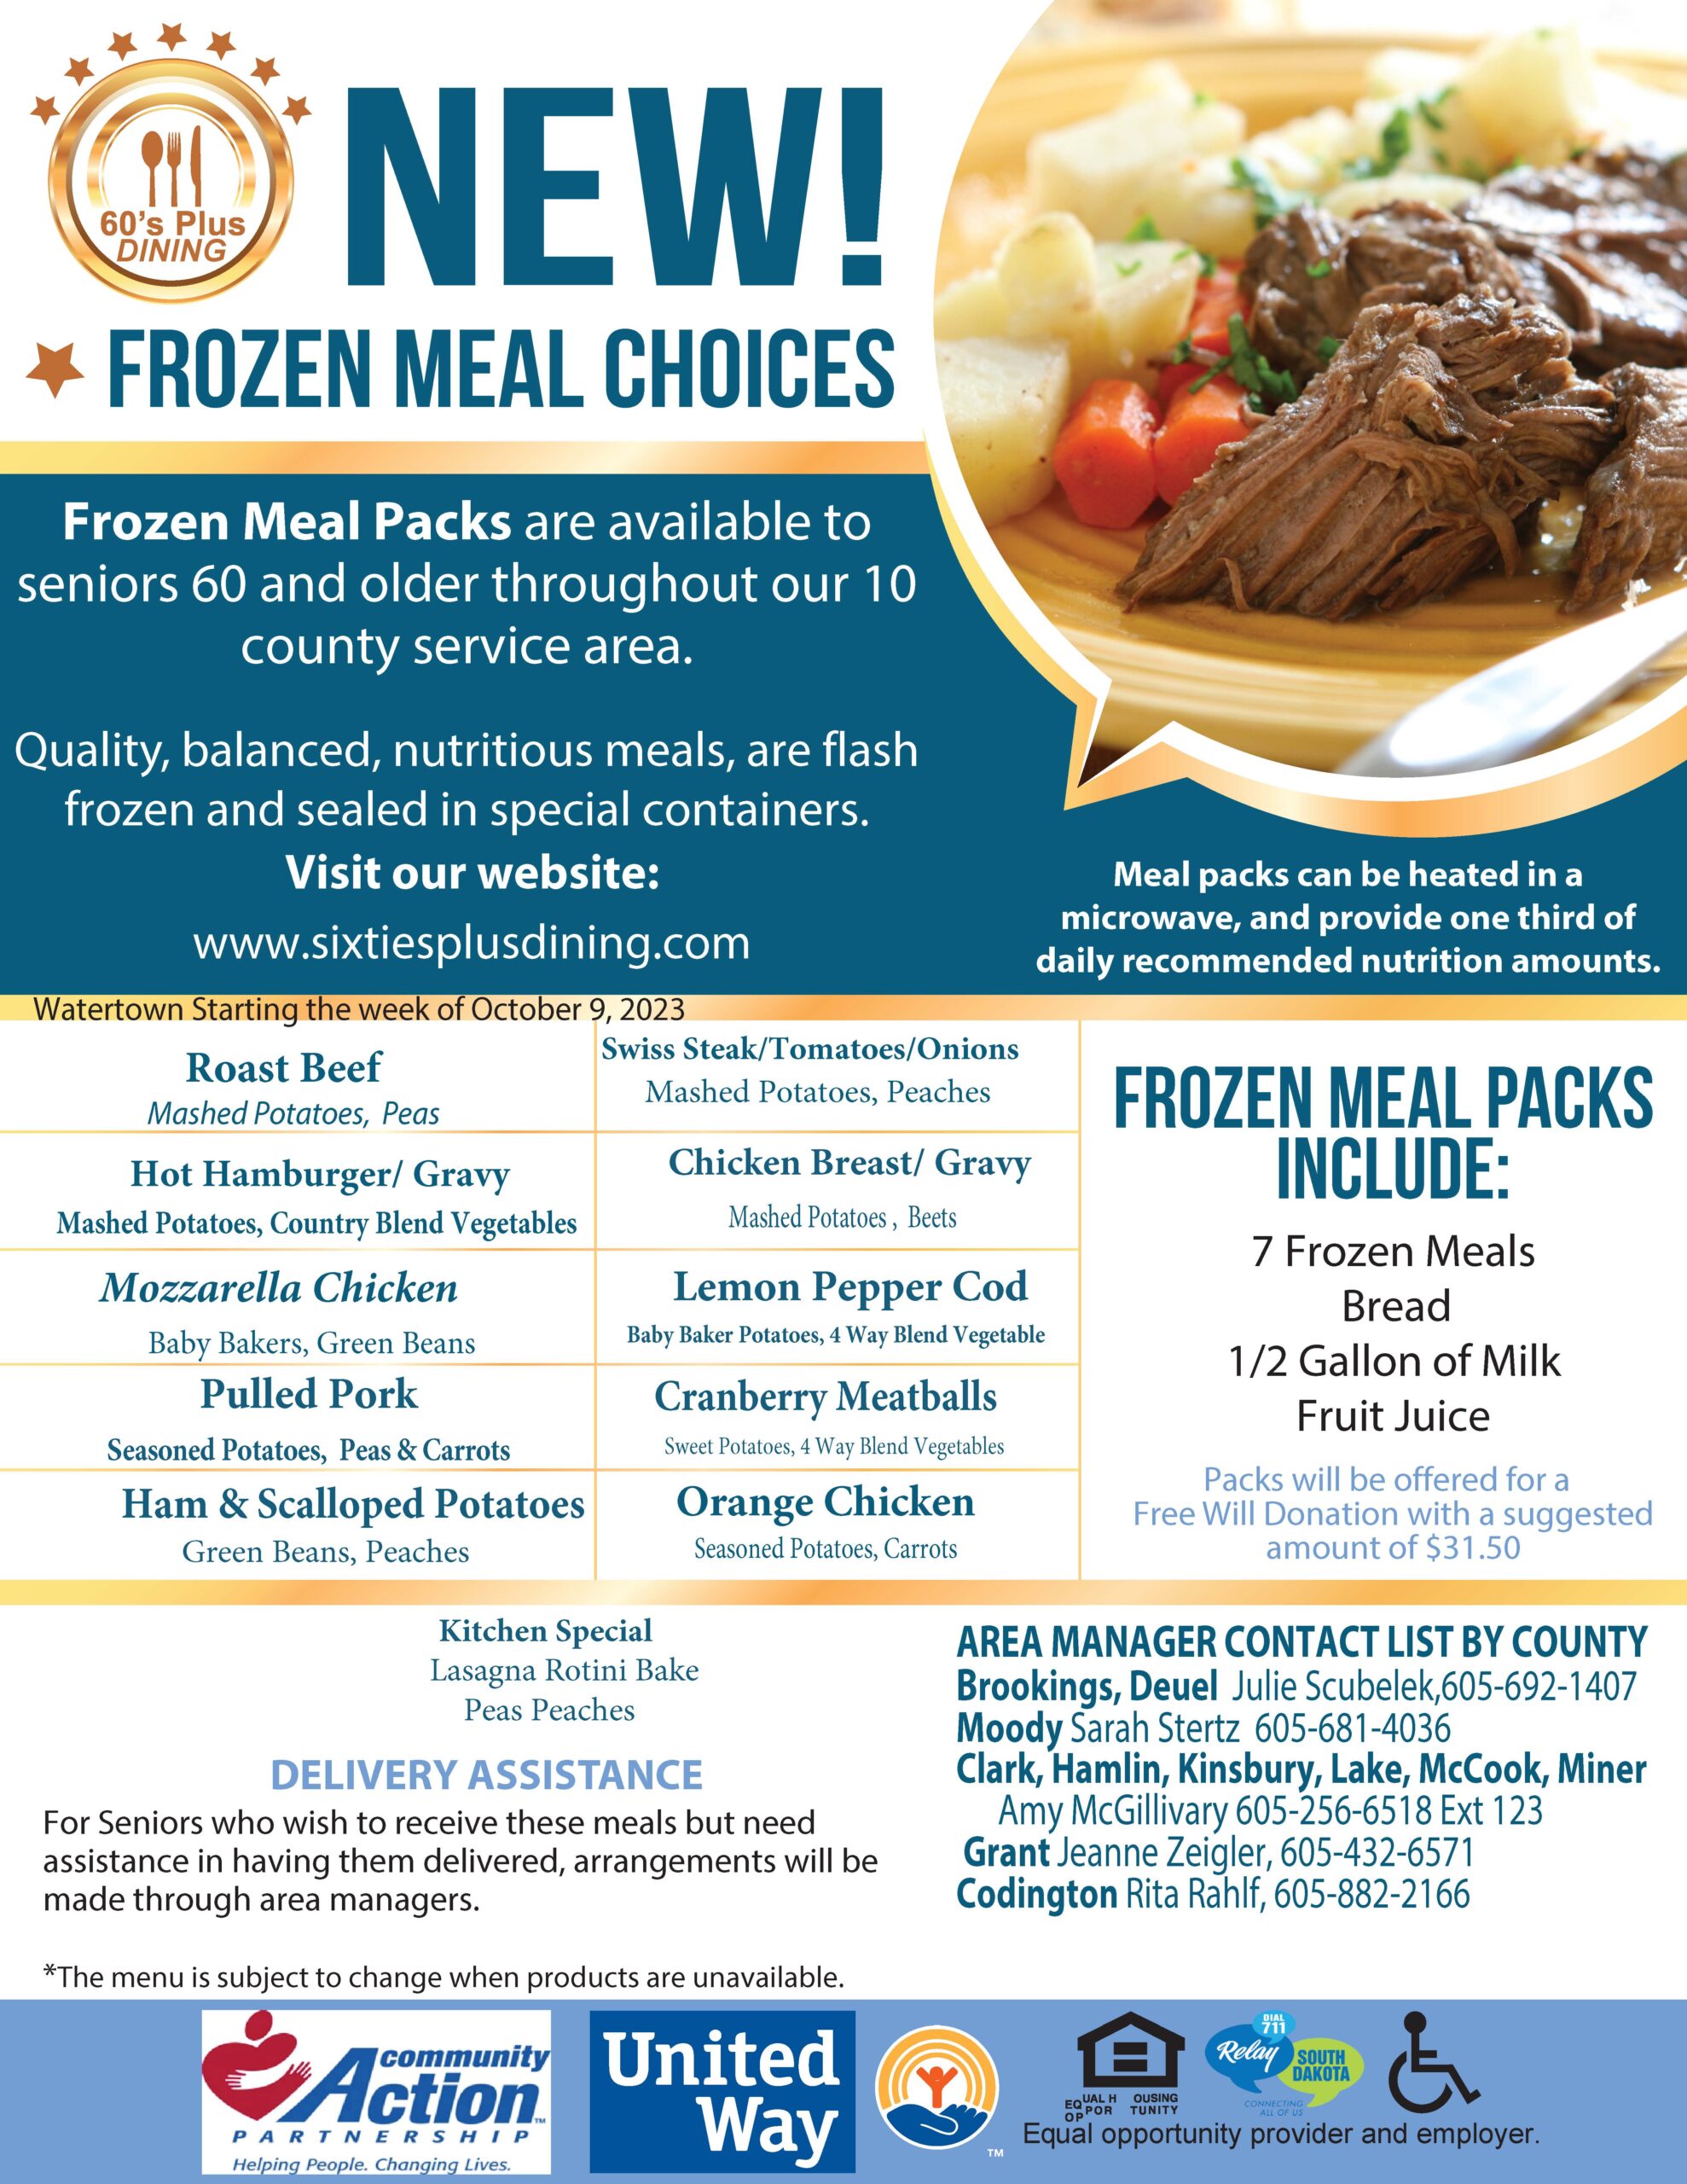 Watertown Frozen Meal Choices -October 2023